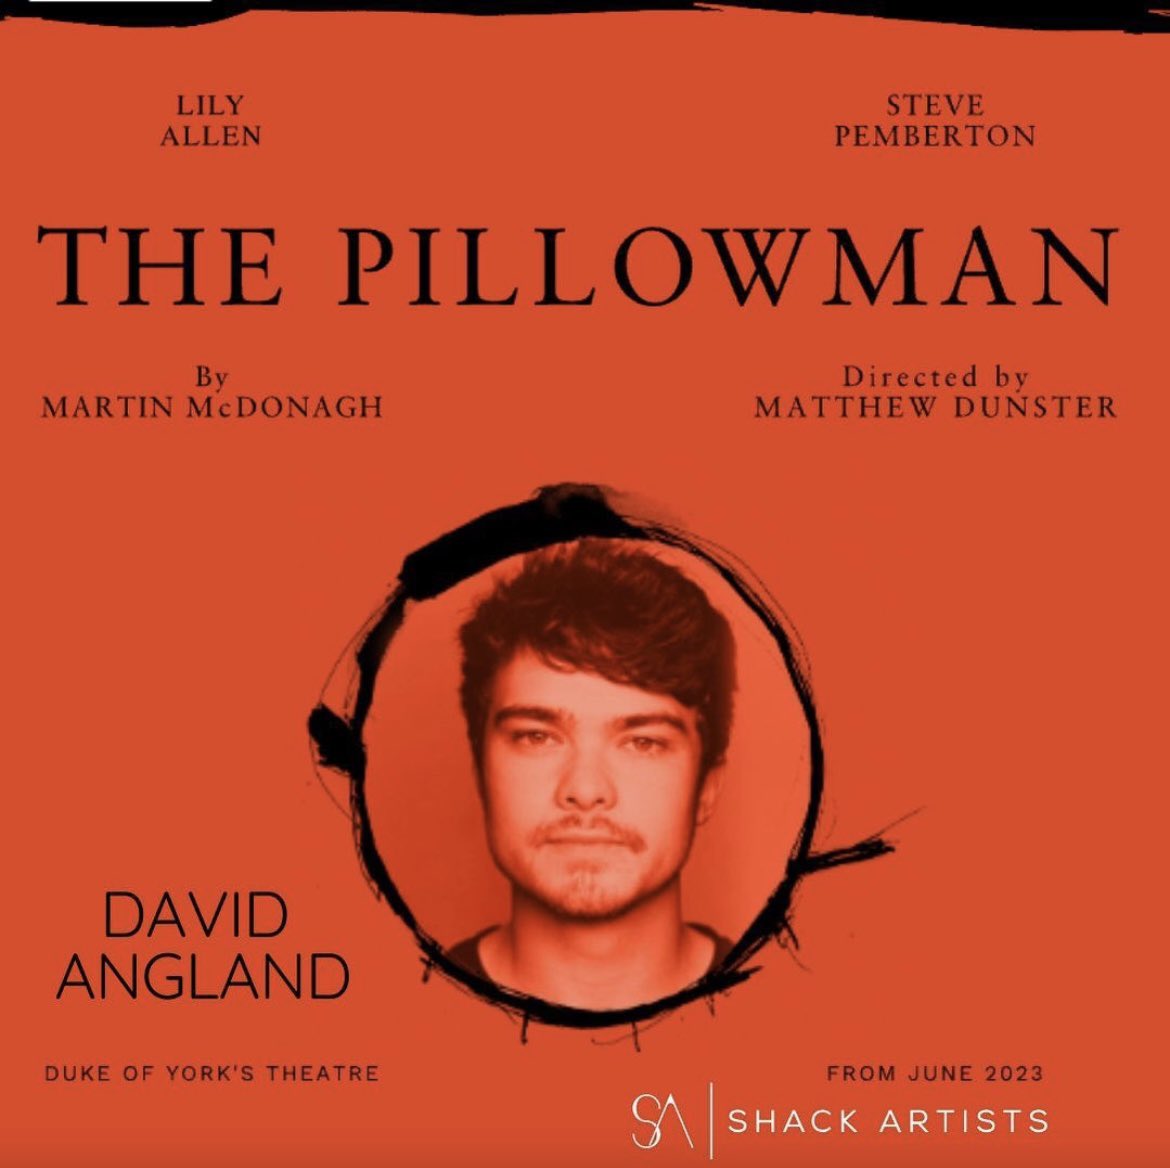 Next up! Really looking forward to be joining the cast and crew! #theatre #thepillowman